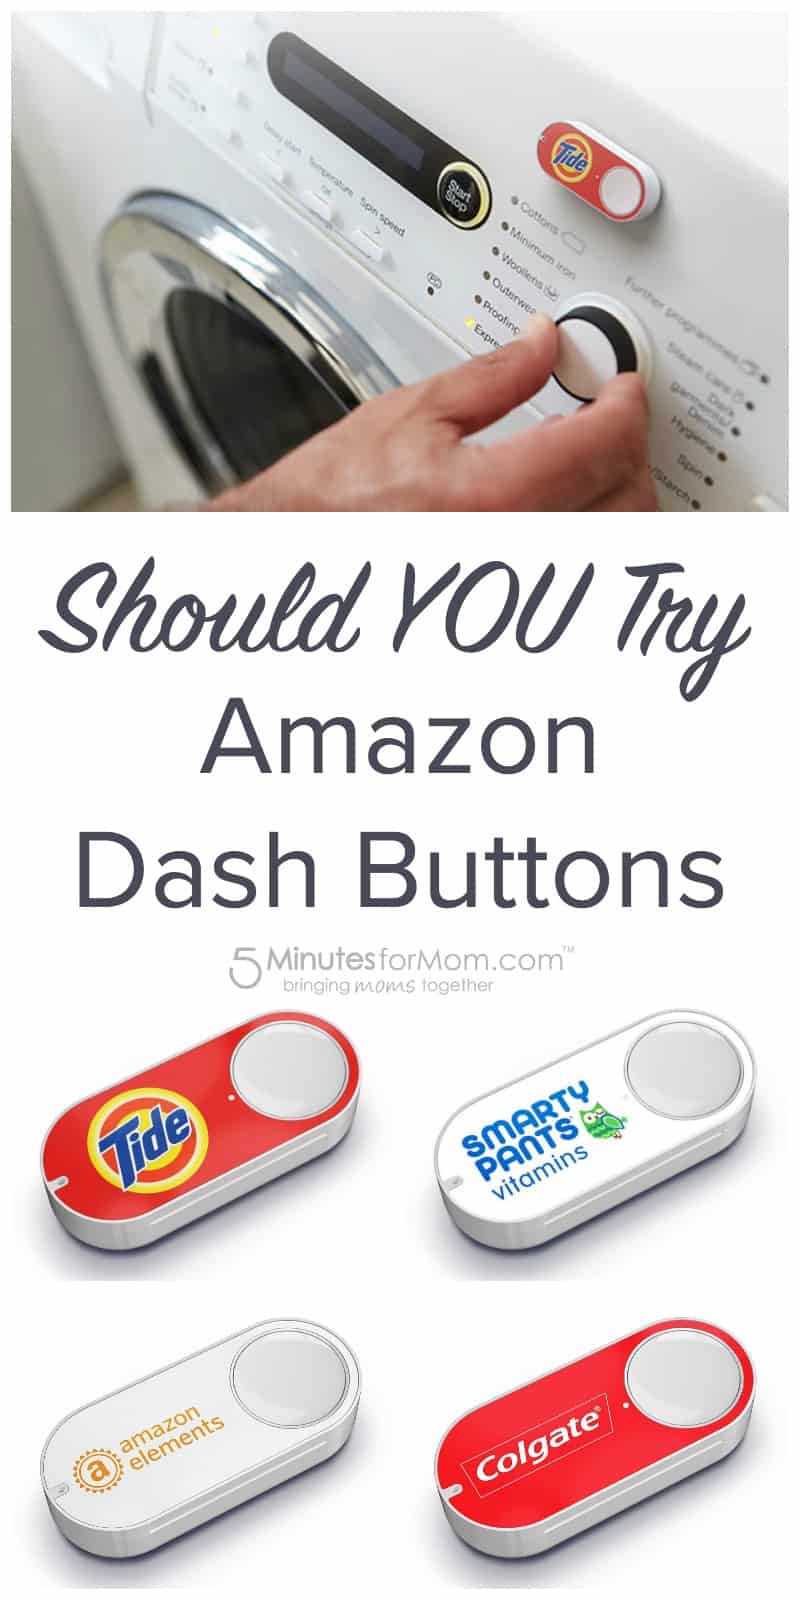 Should you try Amazon Dash Buttons